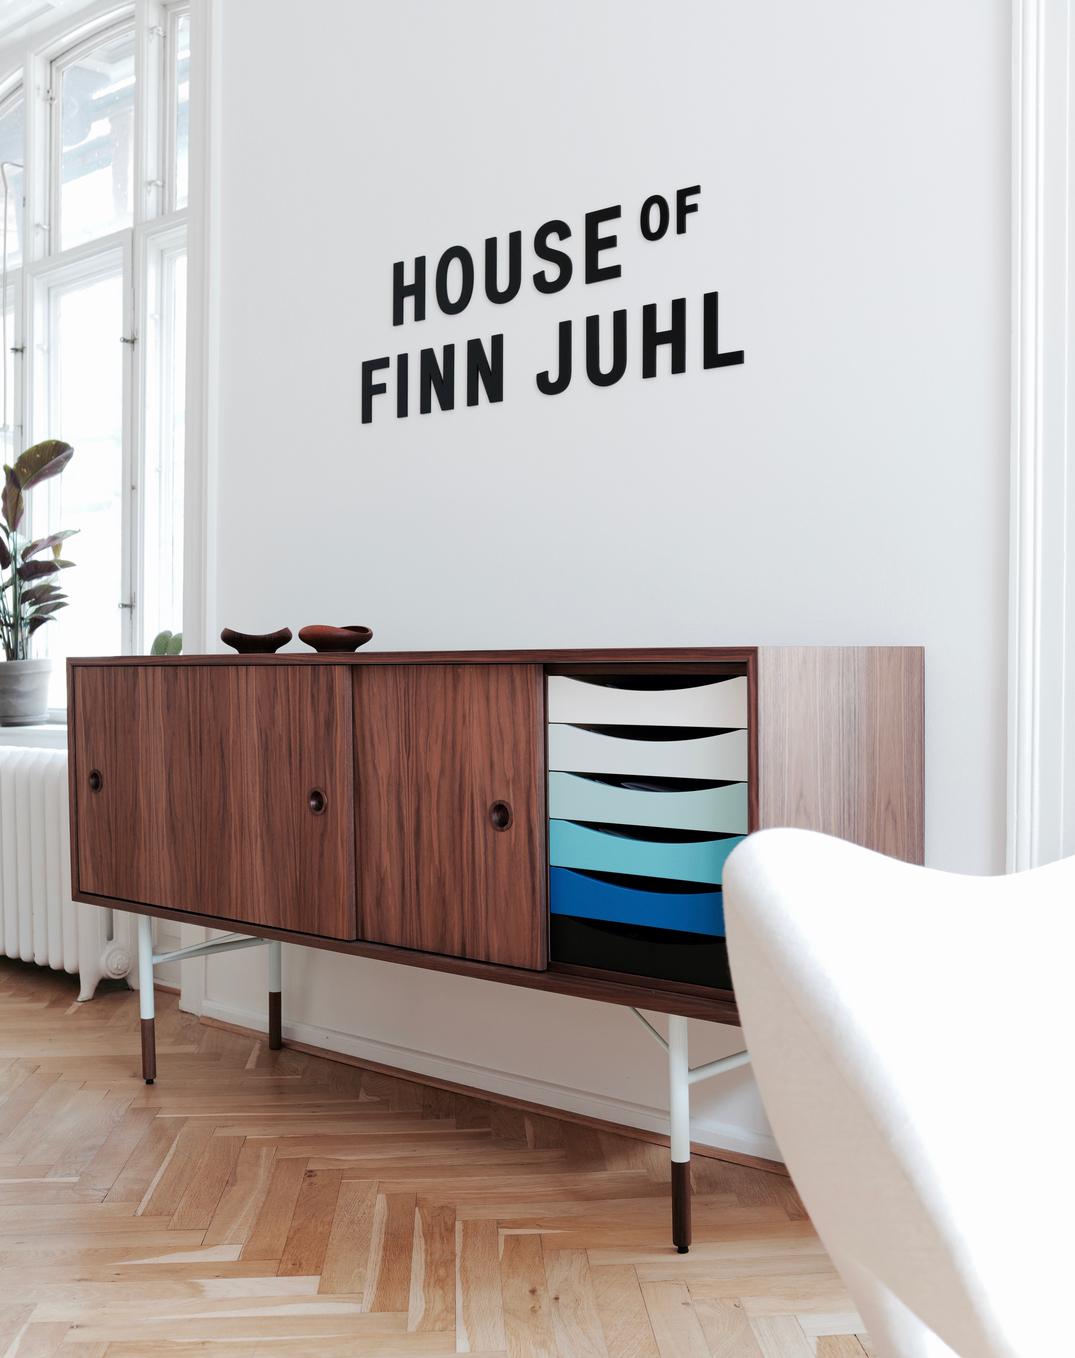 Sideboard designed by Finn Juhl
Manufactured by One collection Finn Juhl (Denmark)

This version is with wood doors.

Finn Juhl’s simple and beautiful sideboard from 1955 combines exclusive wooden materials with the colors from Goethe’s color